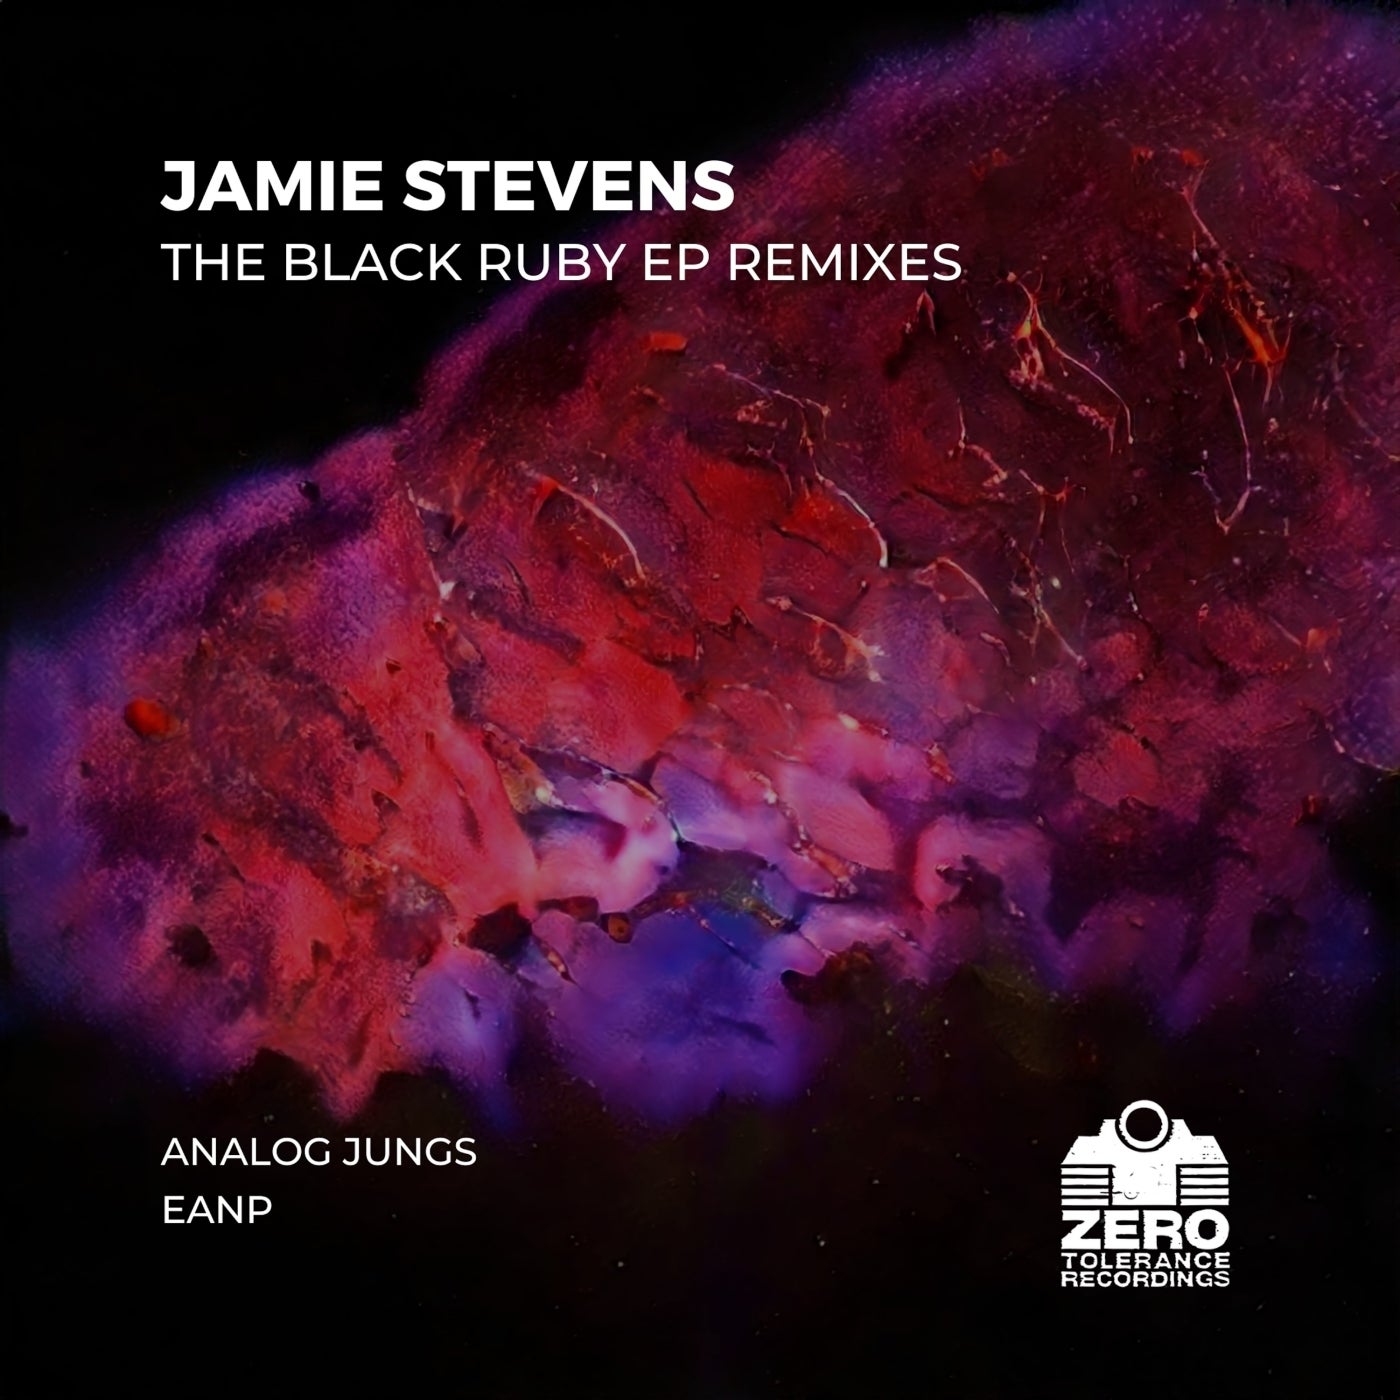 Cover - Jamie Stevens - Path of None (Analog Jungs Remix)